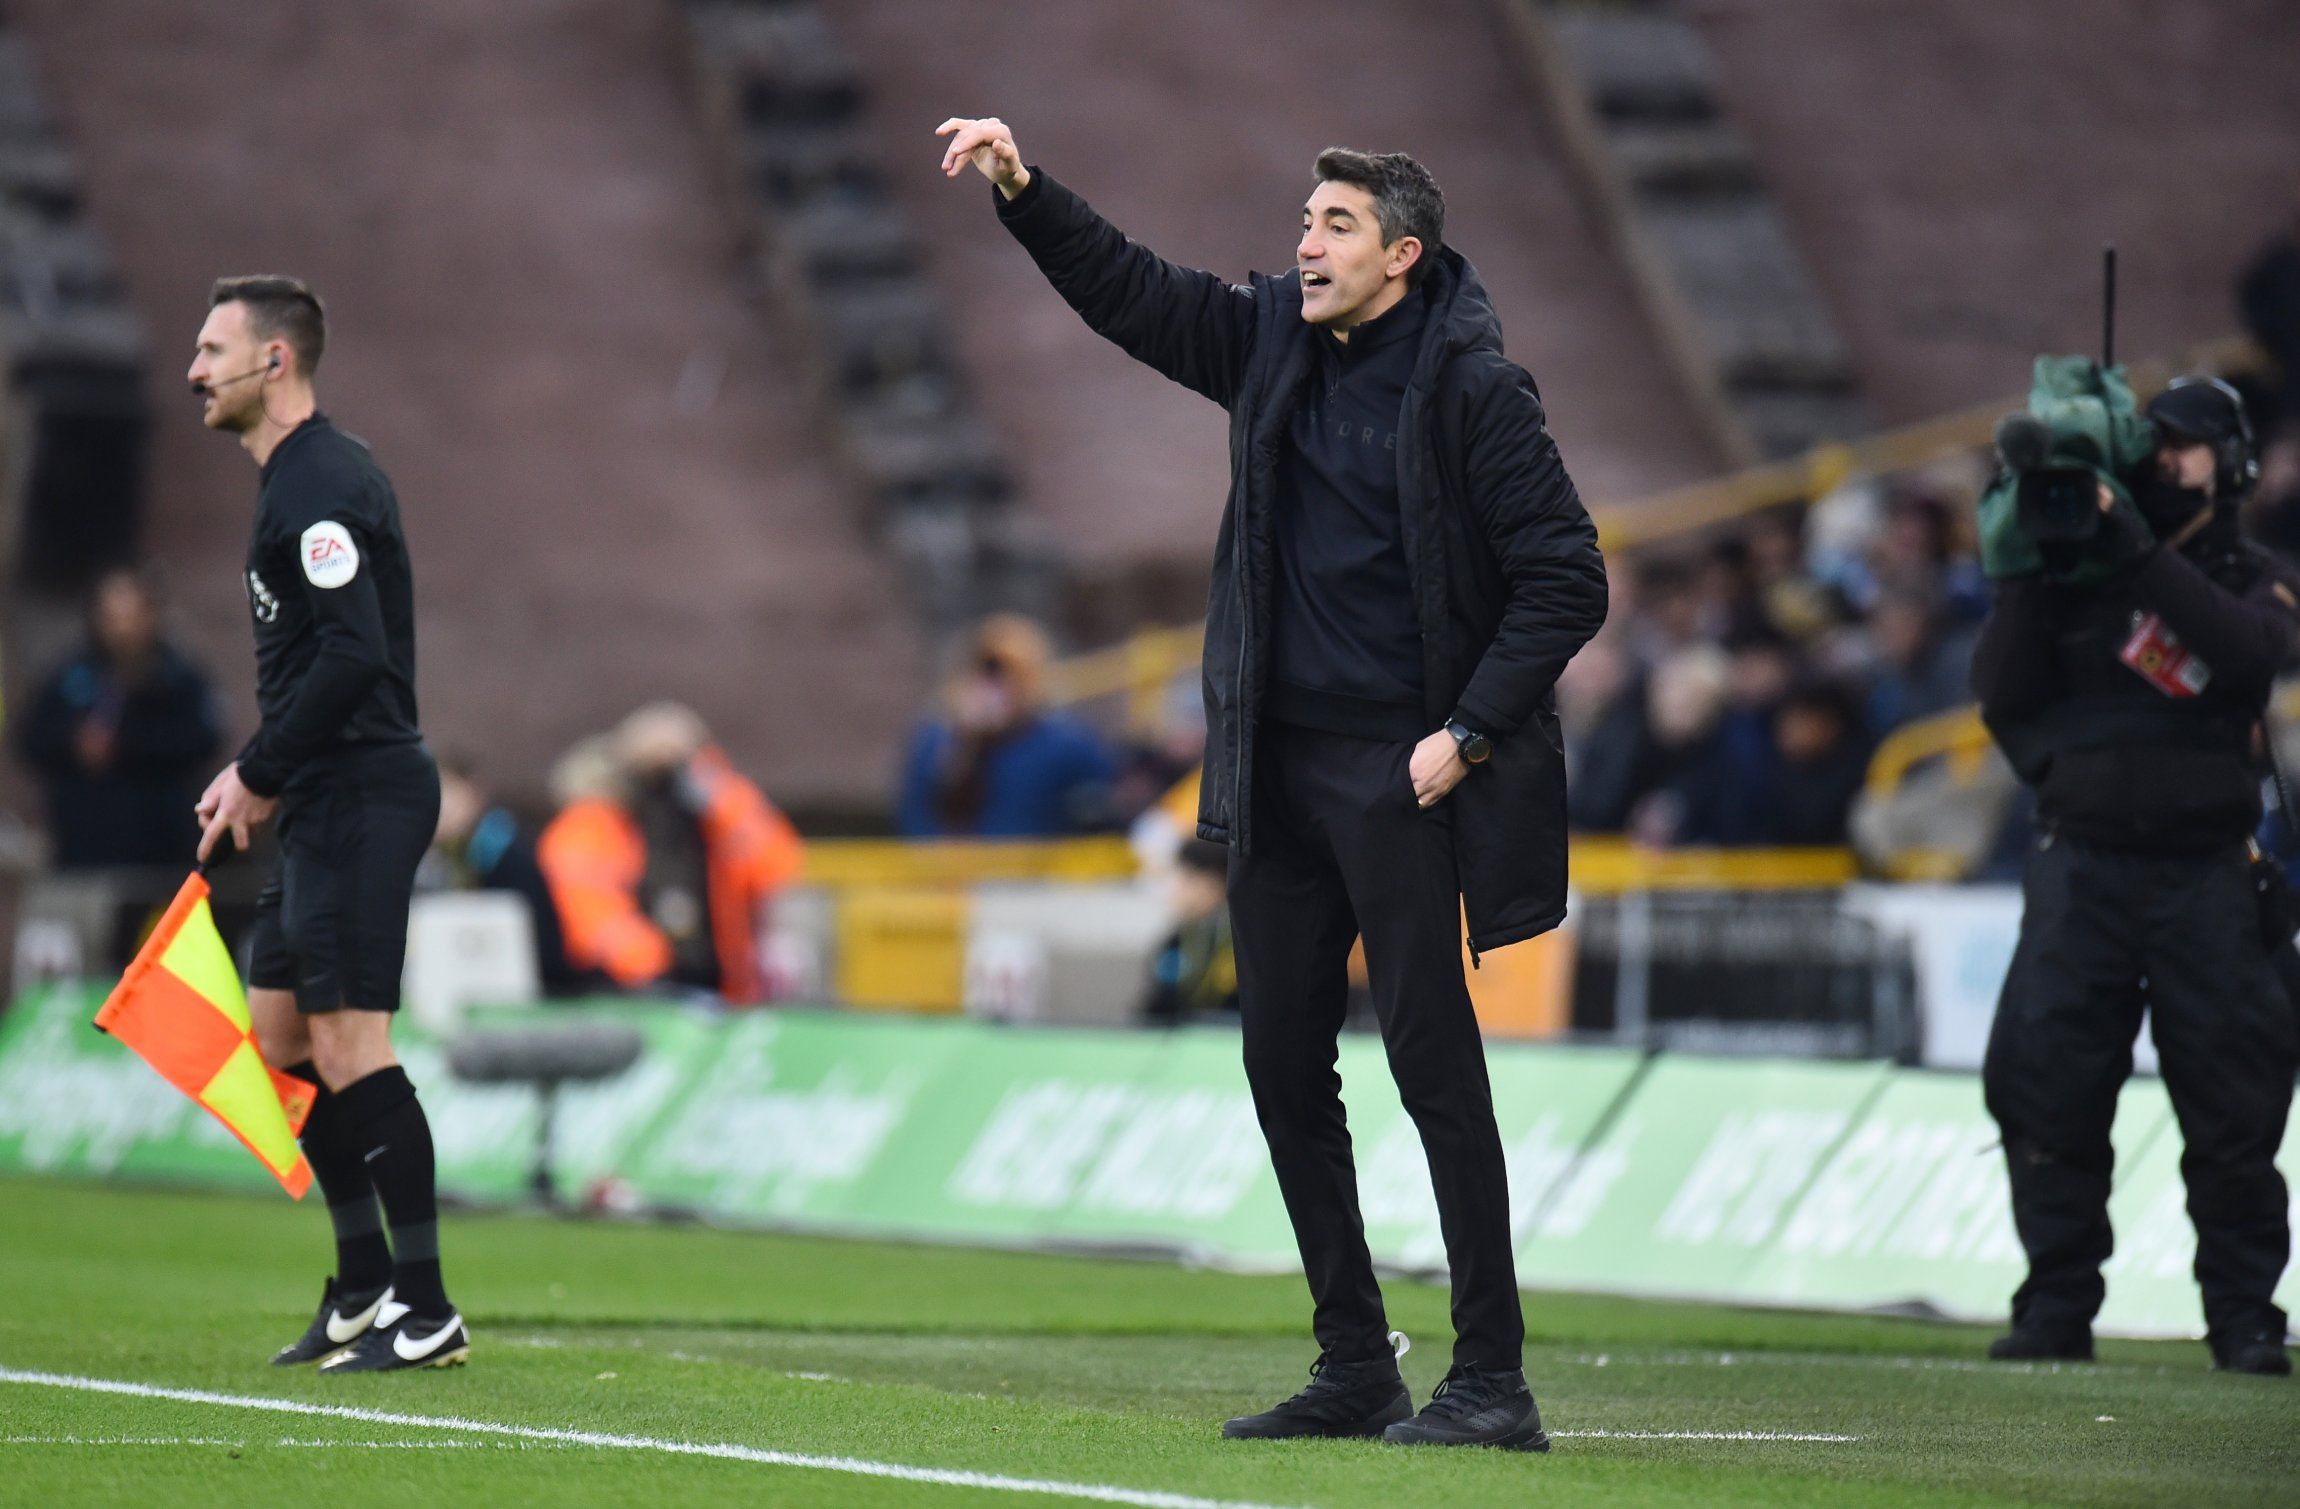 Bruno Lage, Fosun, Jeff Shi, Molineux, The Old Gold, Wolves, Wolves fans, Wolves info, Wolves latest, Wolves news, Wolves updates, WWFC, WWFC news, WWFC update, Premier League, Premier League news, Wolverhampton Wanderers, Wolves transfer news, January transfer window, Manchester United, Wolves predicted XI, 
